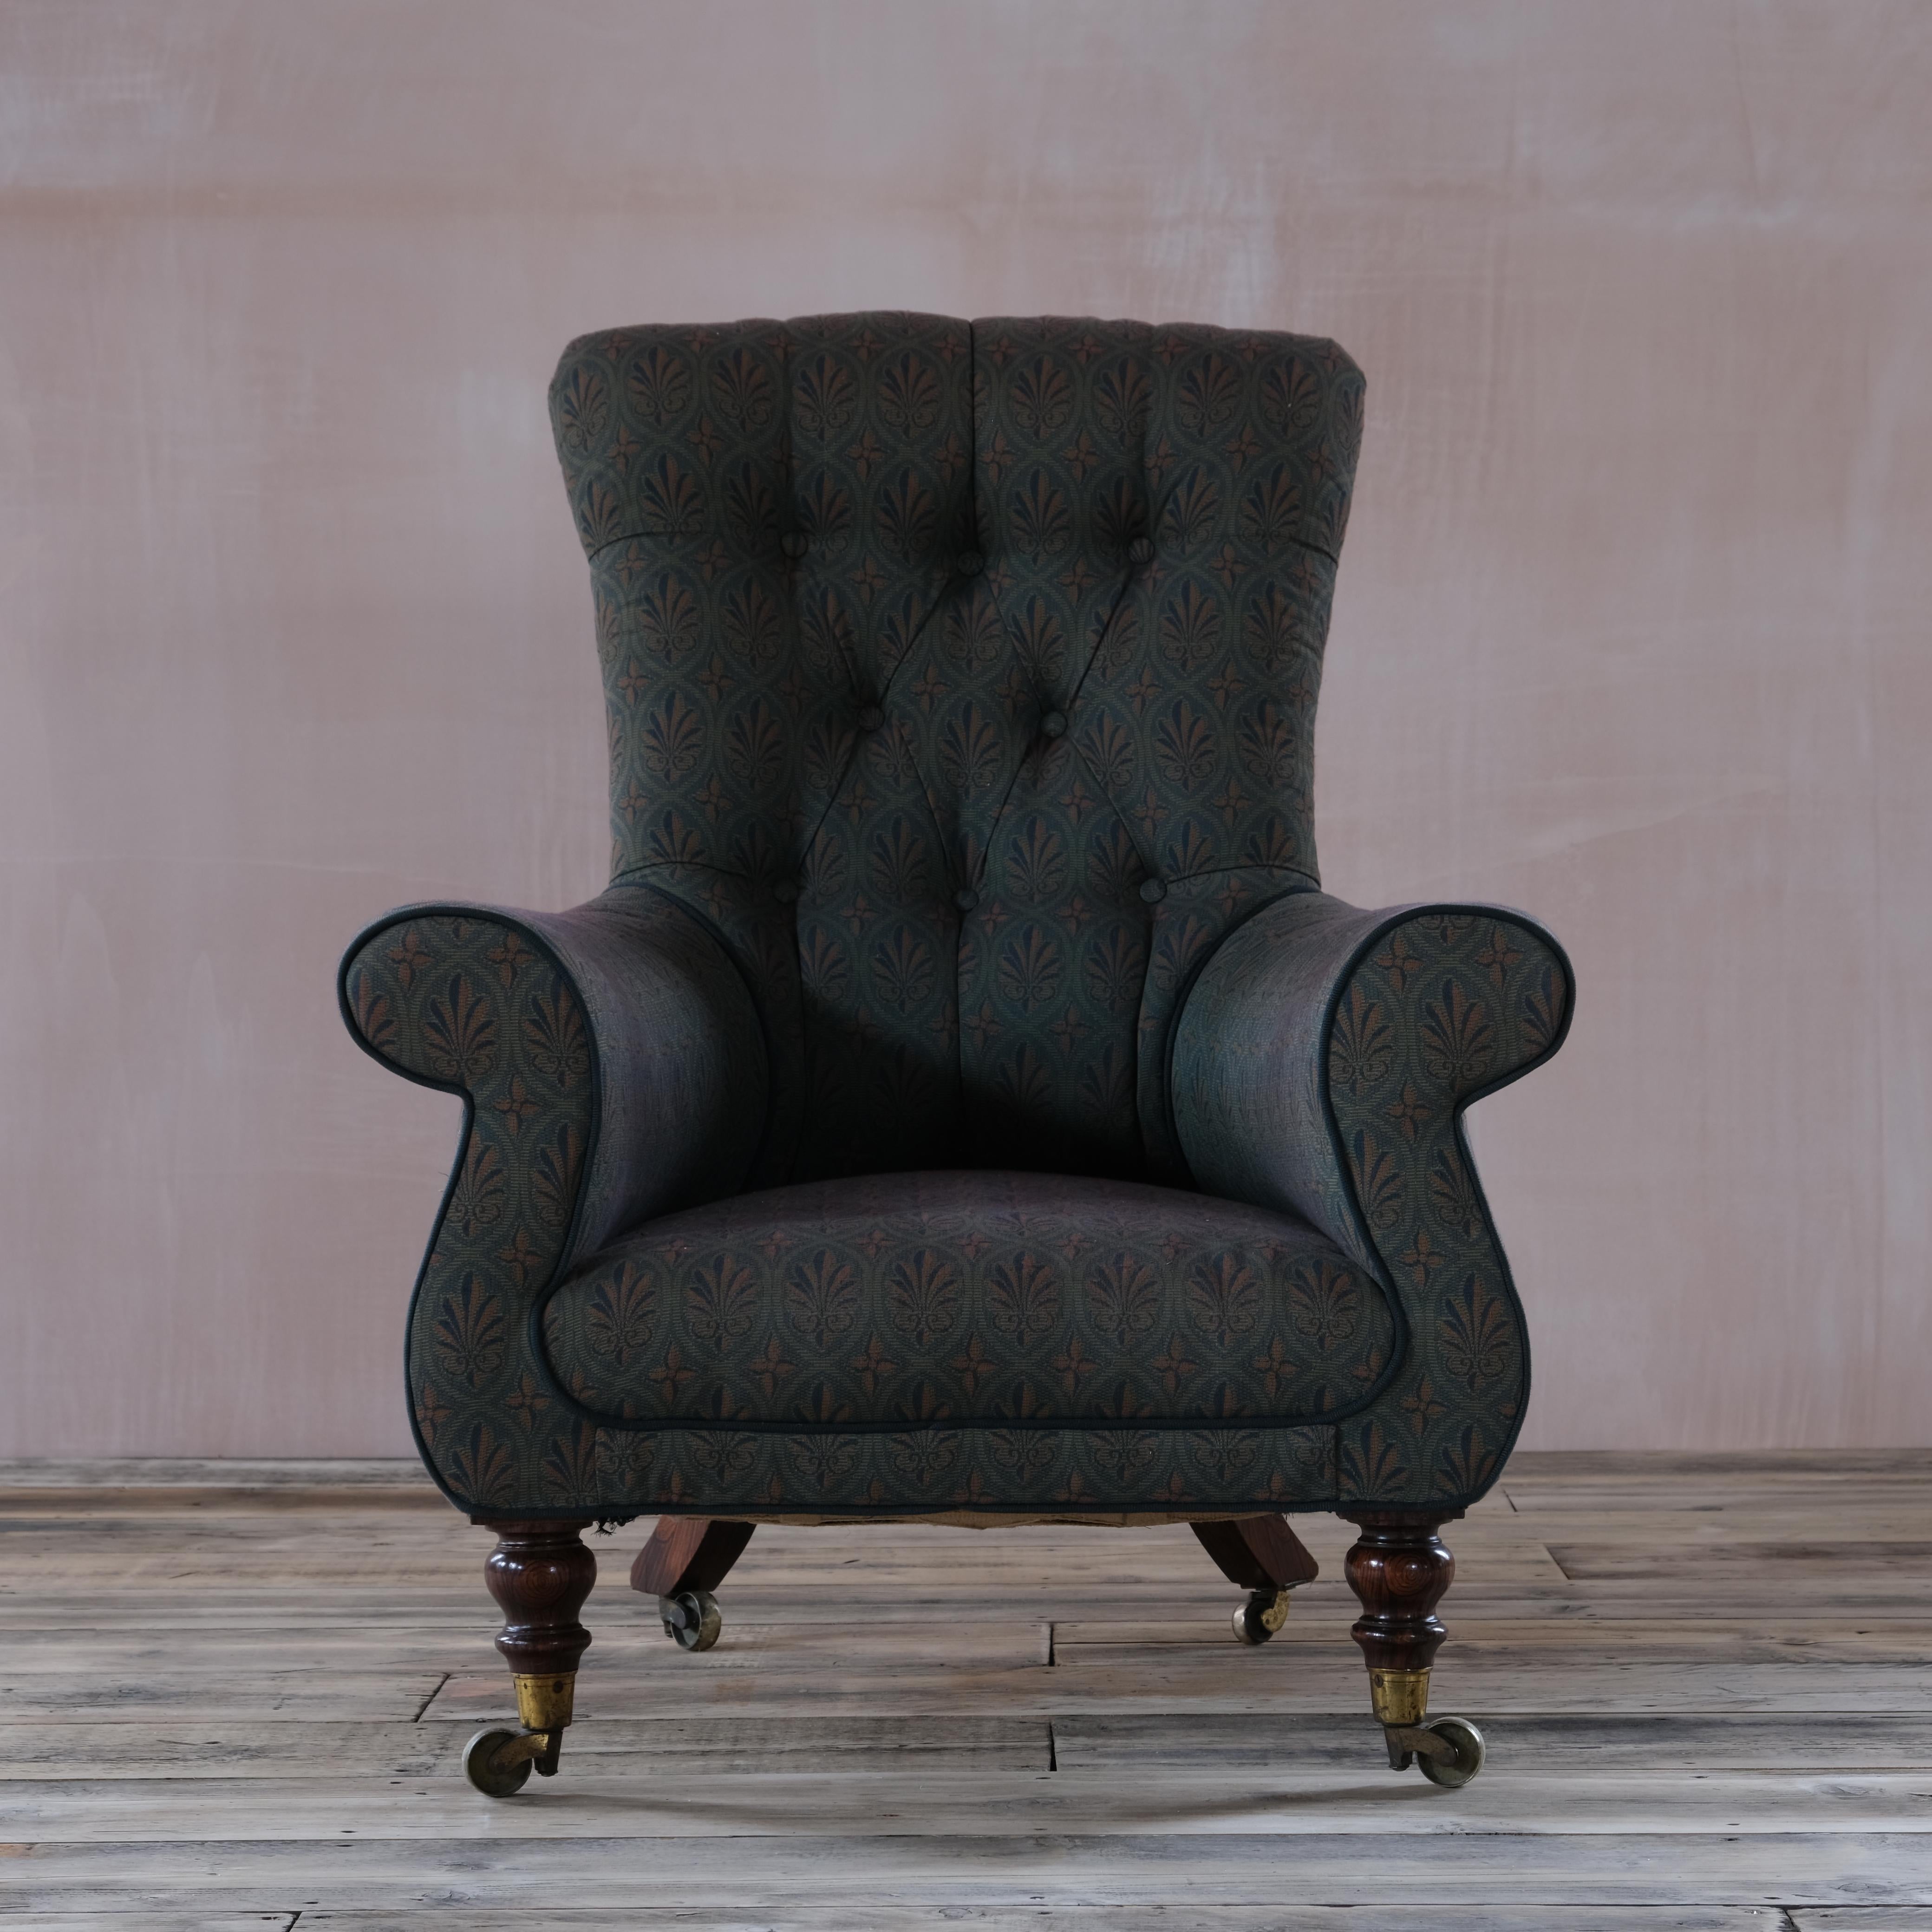 A very good quality regency armchair by Miles & Edwards - London. Raised on Faux rosewood legs and the original brass casters. circa 1835

Miles & Edwards were taken over by C Hindley & Sons in 1844

The fabric is in presentable order, clean